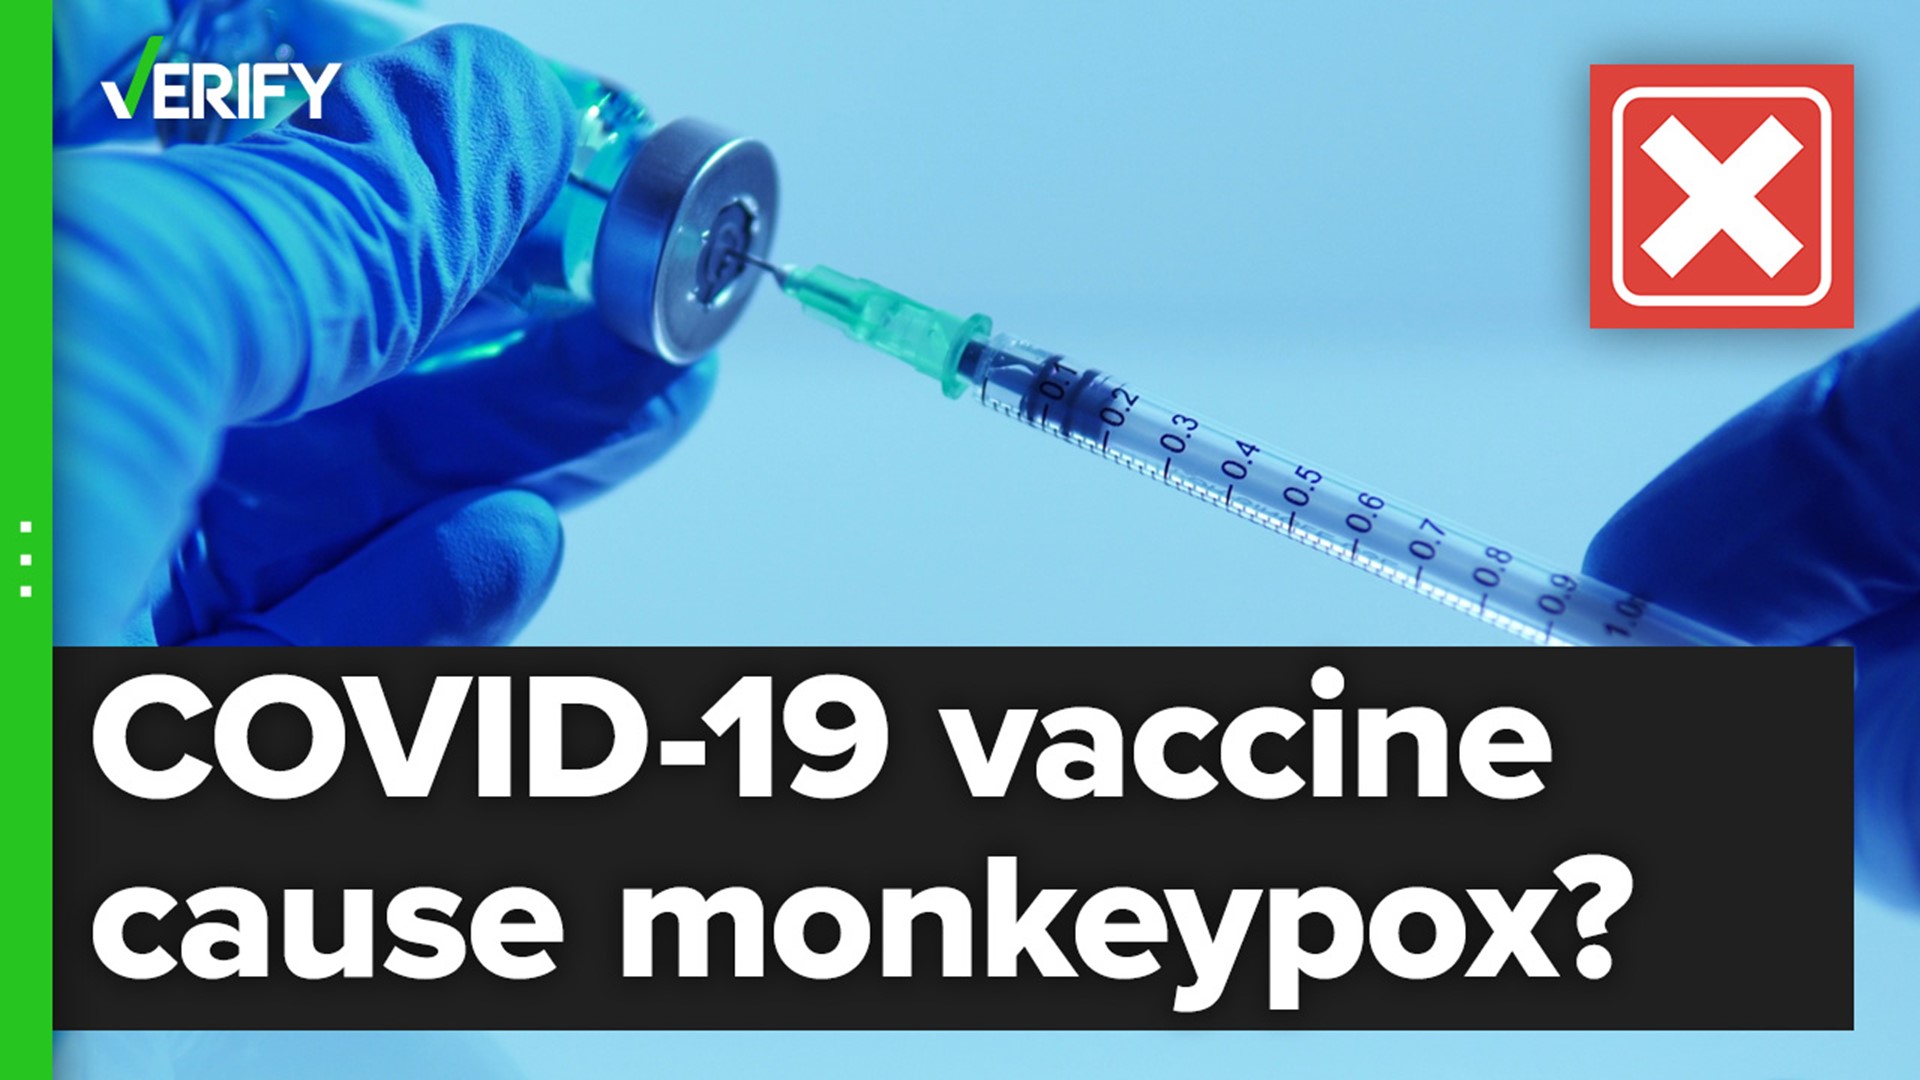 Medical experts told VERIFY it’s not possible to get monkeypox from the COVID-19 vaccine.